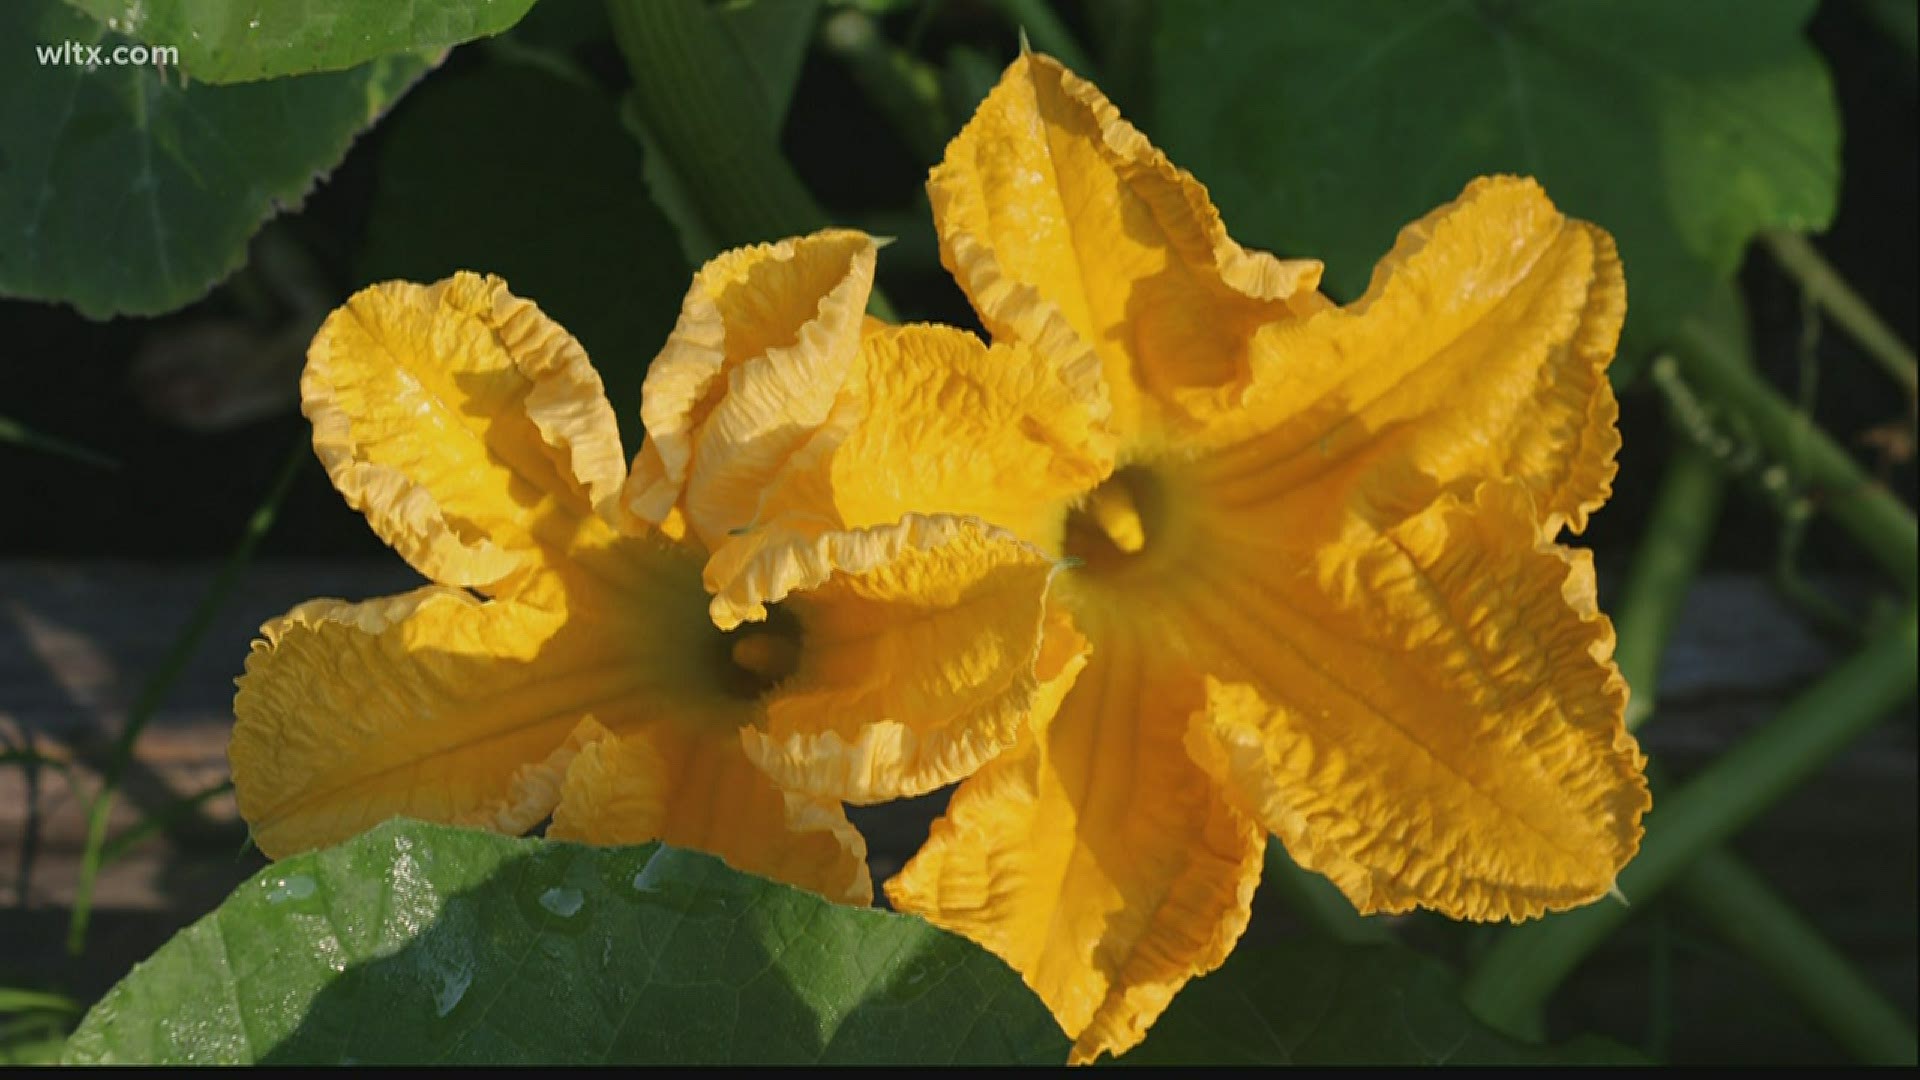 If your squash plants have lots of flowers but no fruit, there's likely nothing wrong. Alex explains why these plants need to get big before producing fruit.